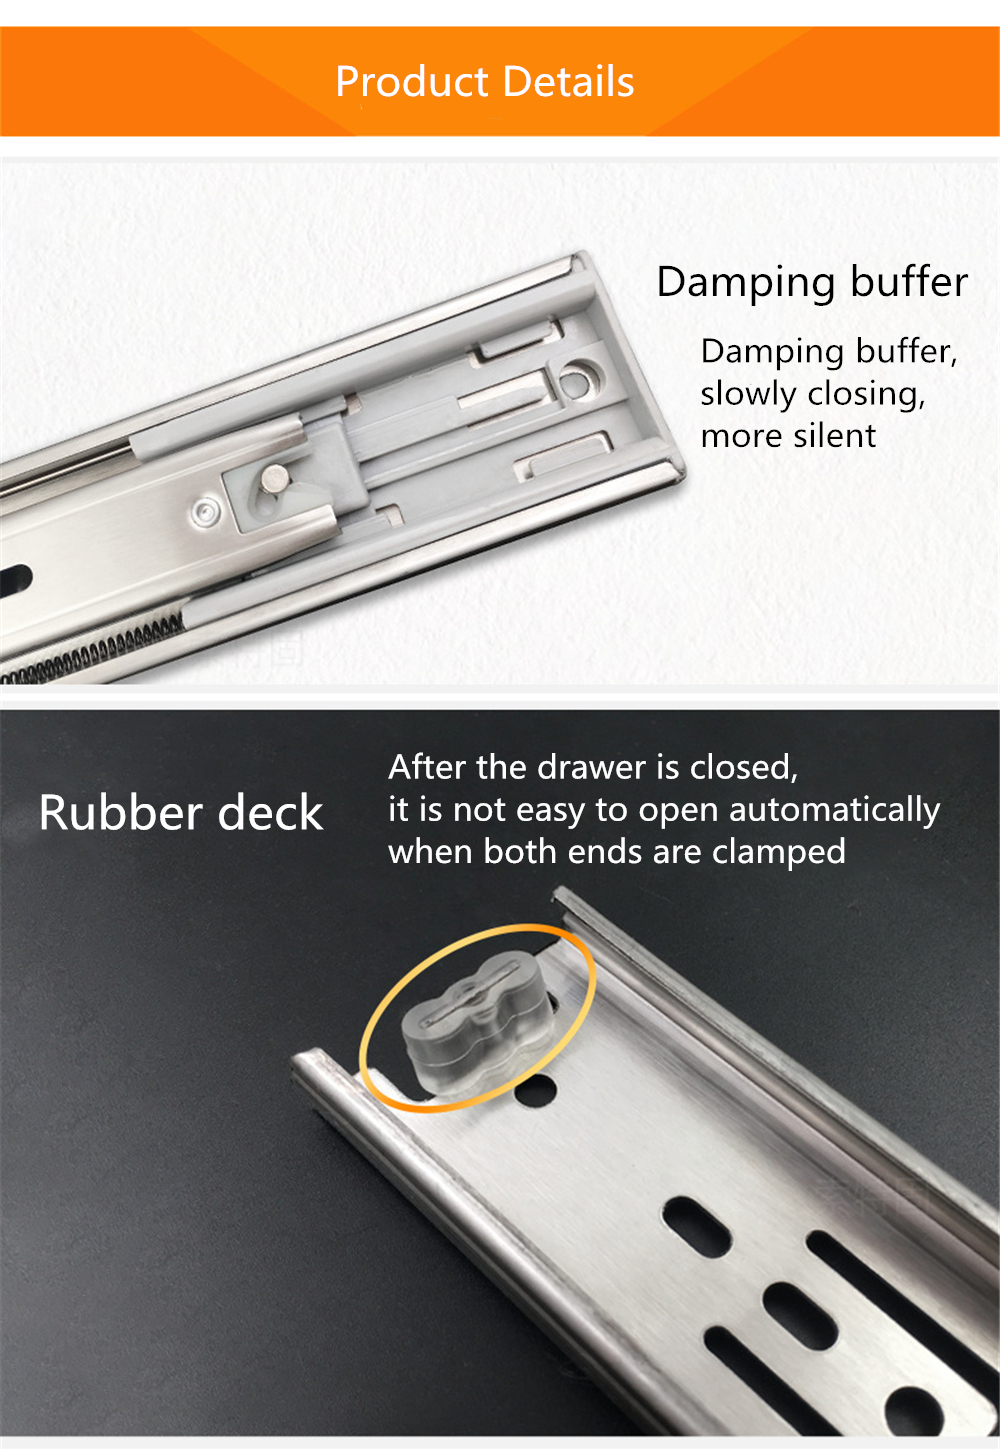 Cabinet-Damping-Slide-Rail-Three-section-Rail-Thickened-Stainless-Steel-Slide-Rail-Guide-Drawer-Buff-1791884-6